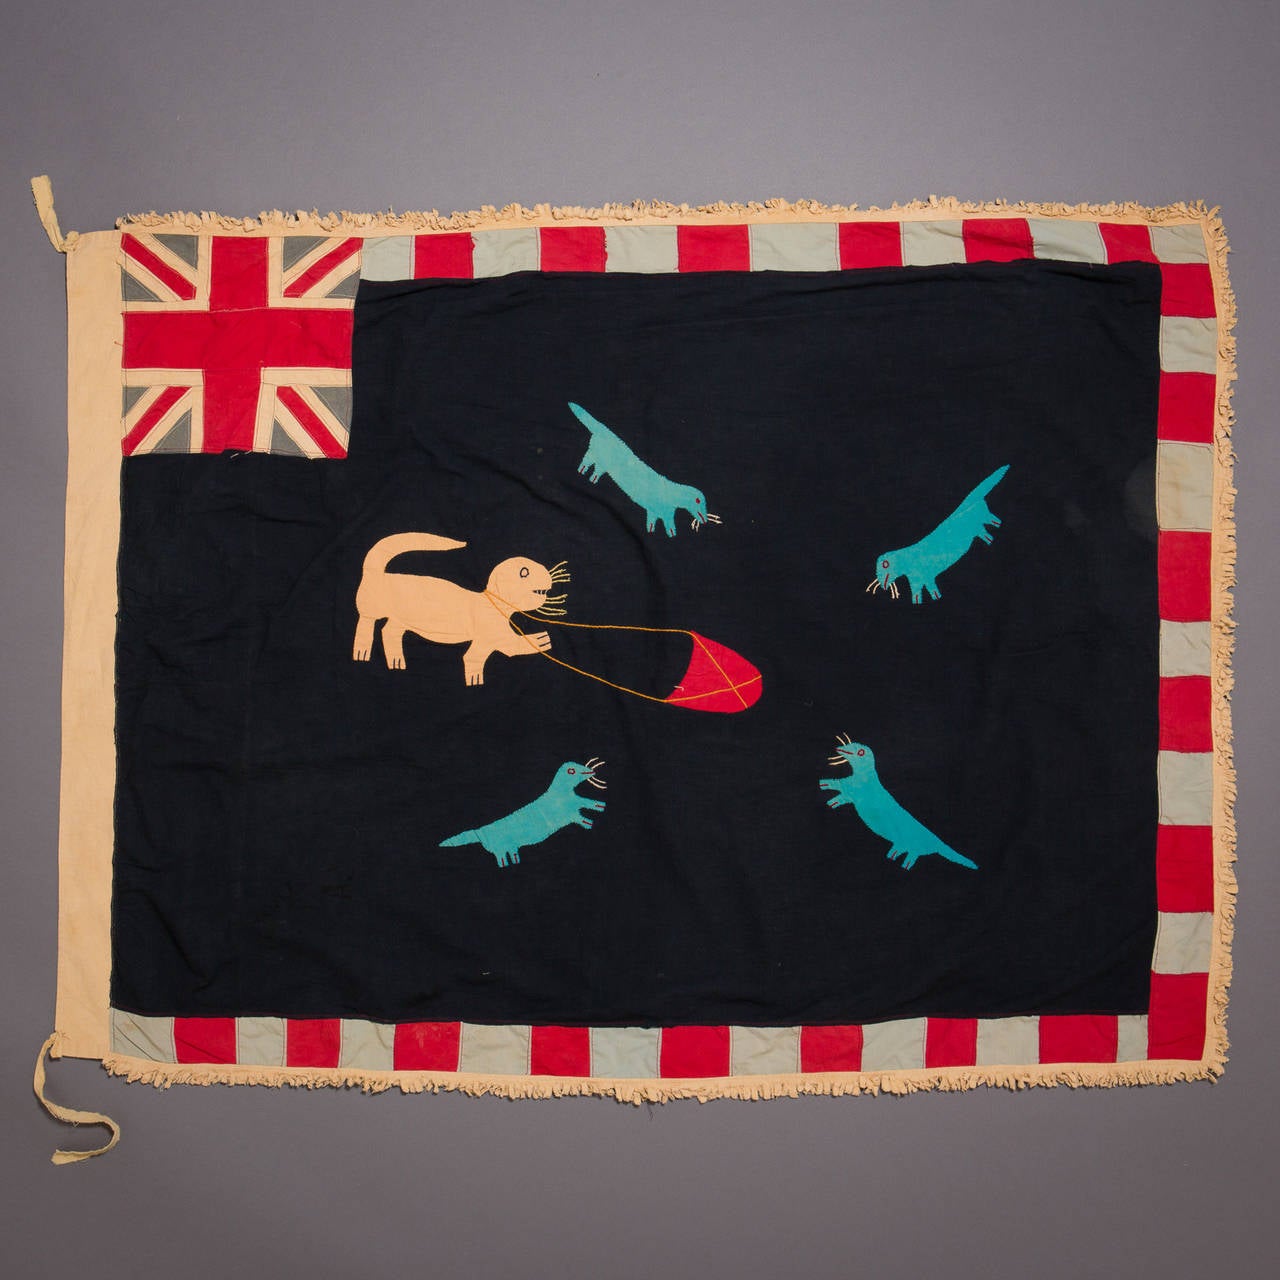 A large and graphically stunning Asafo flag.

Fante flags represent the merger of two cultural traditions, the Akan tradition of combining proverbs with visual imagery, and the European heraldic tradition, which used flags and banners displaying